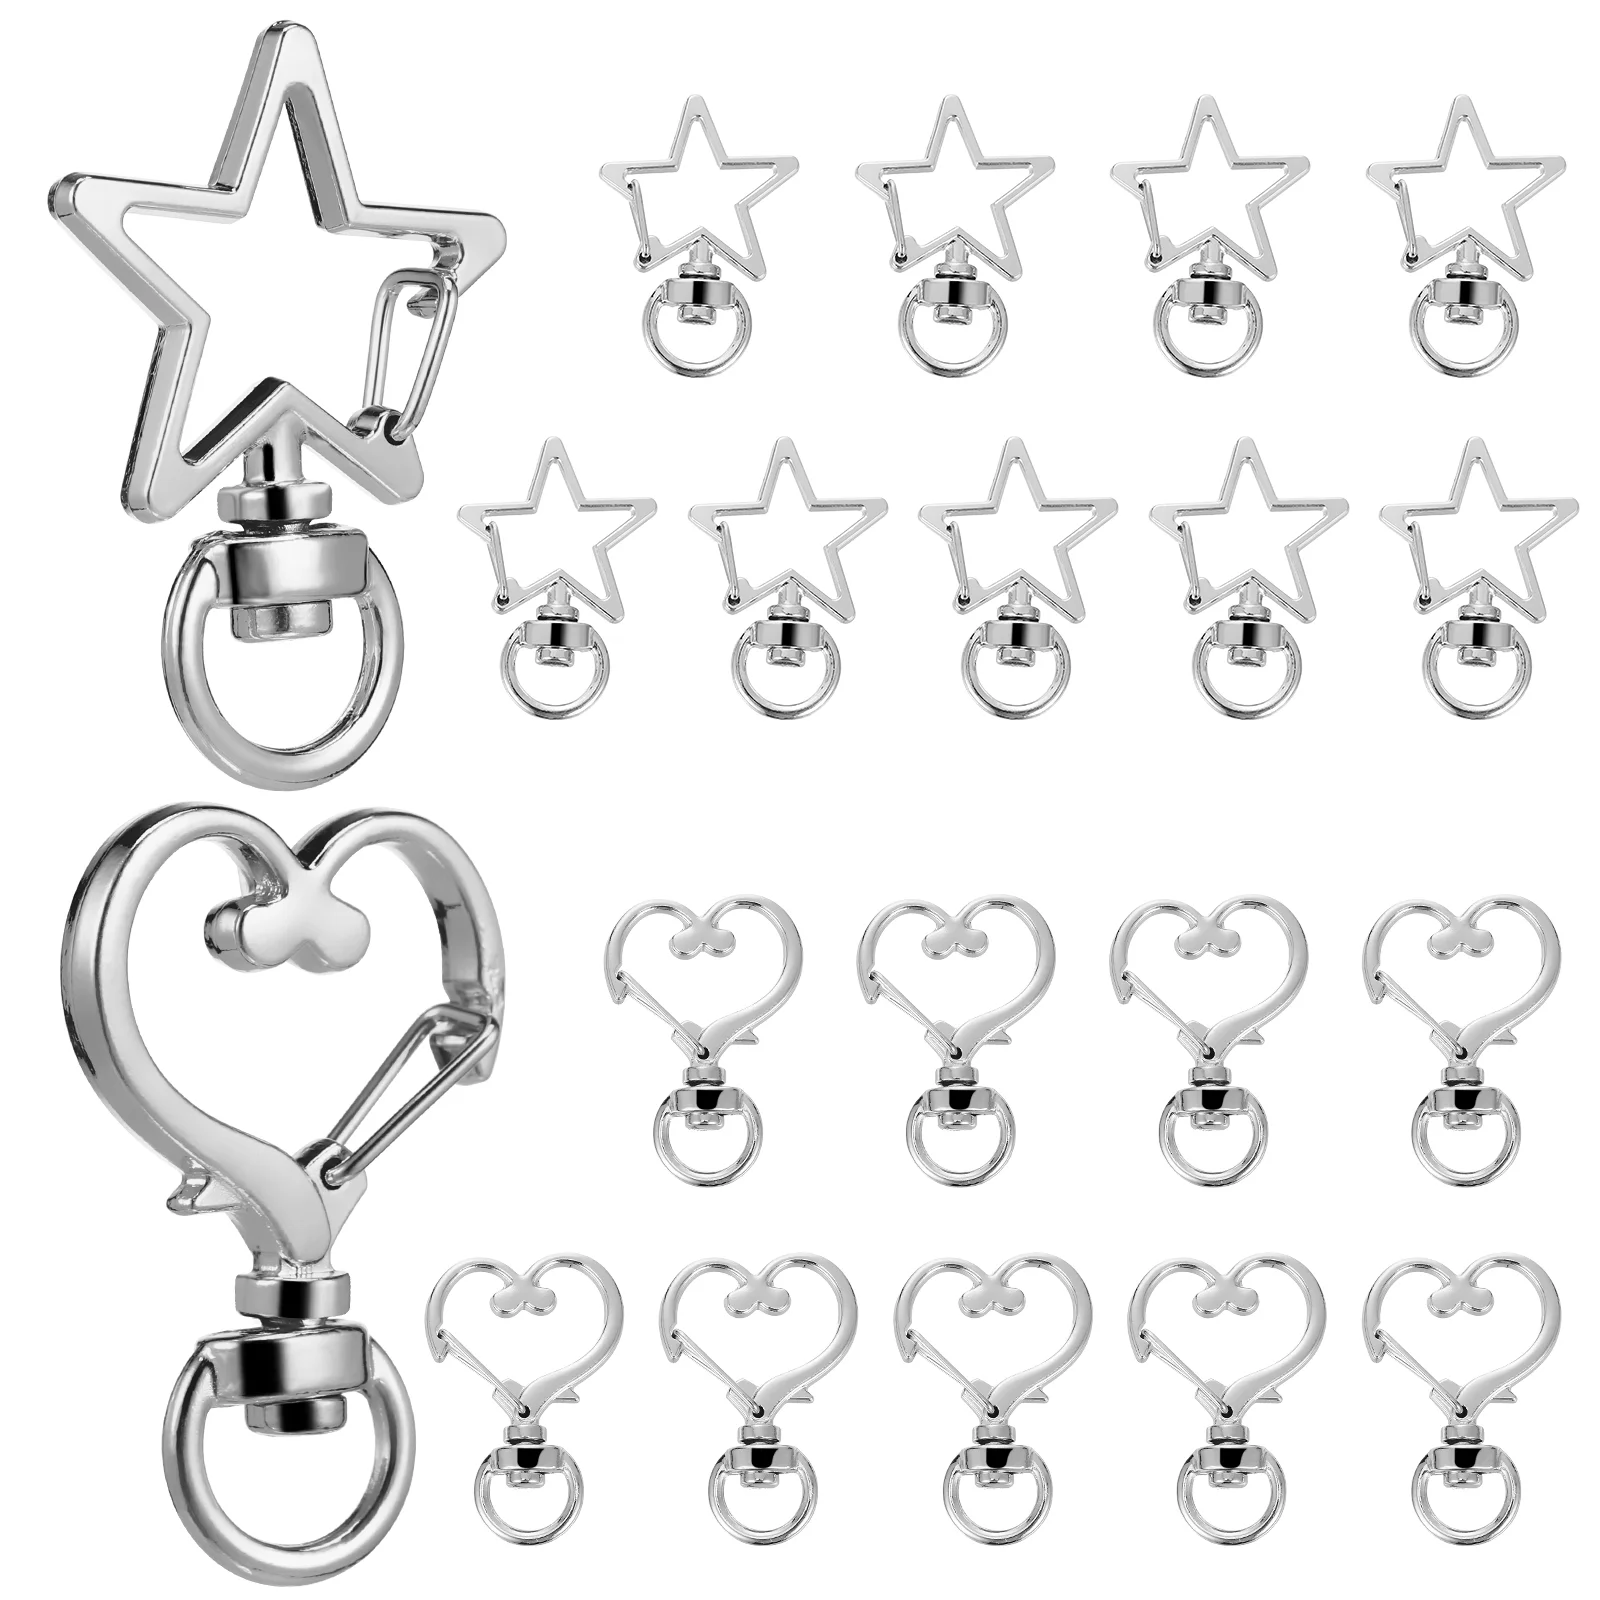 

20Pcs Lanyard Heart Shaped Keychain Rings Star Shaped Lobster Claw Clasp Metal Swivel Clip Snap Hook Bag Keychains